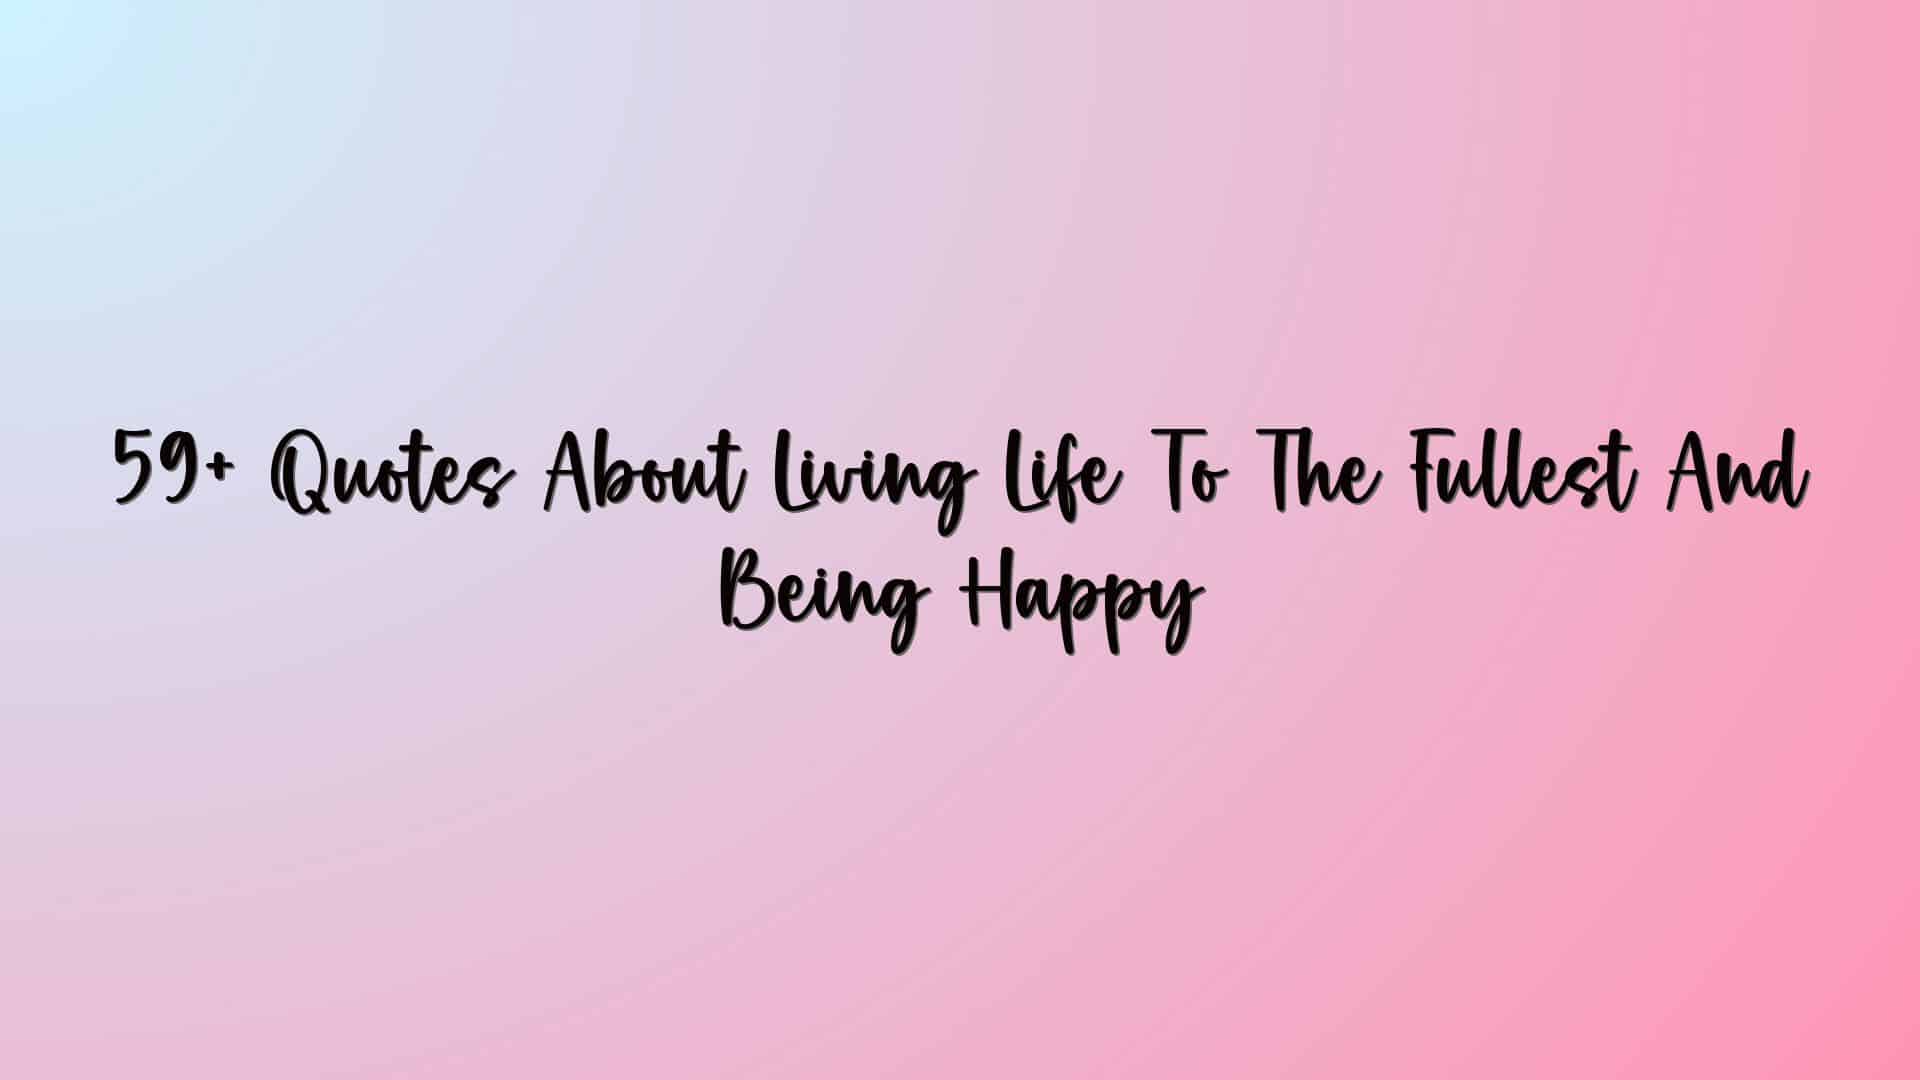 59+ Quotes About Living Life To The Fullest And Being Happy